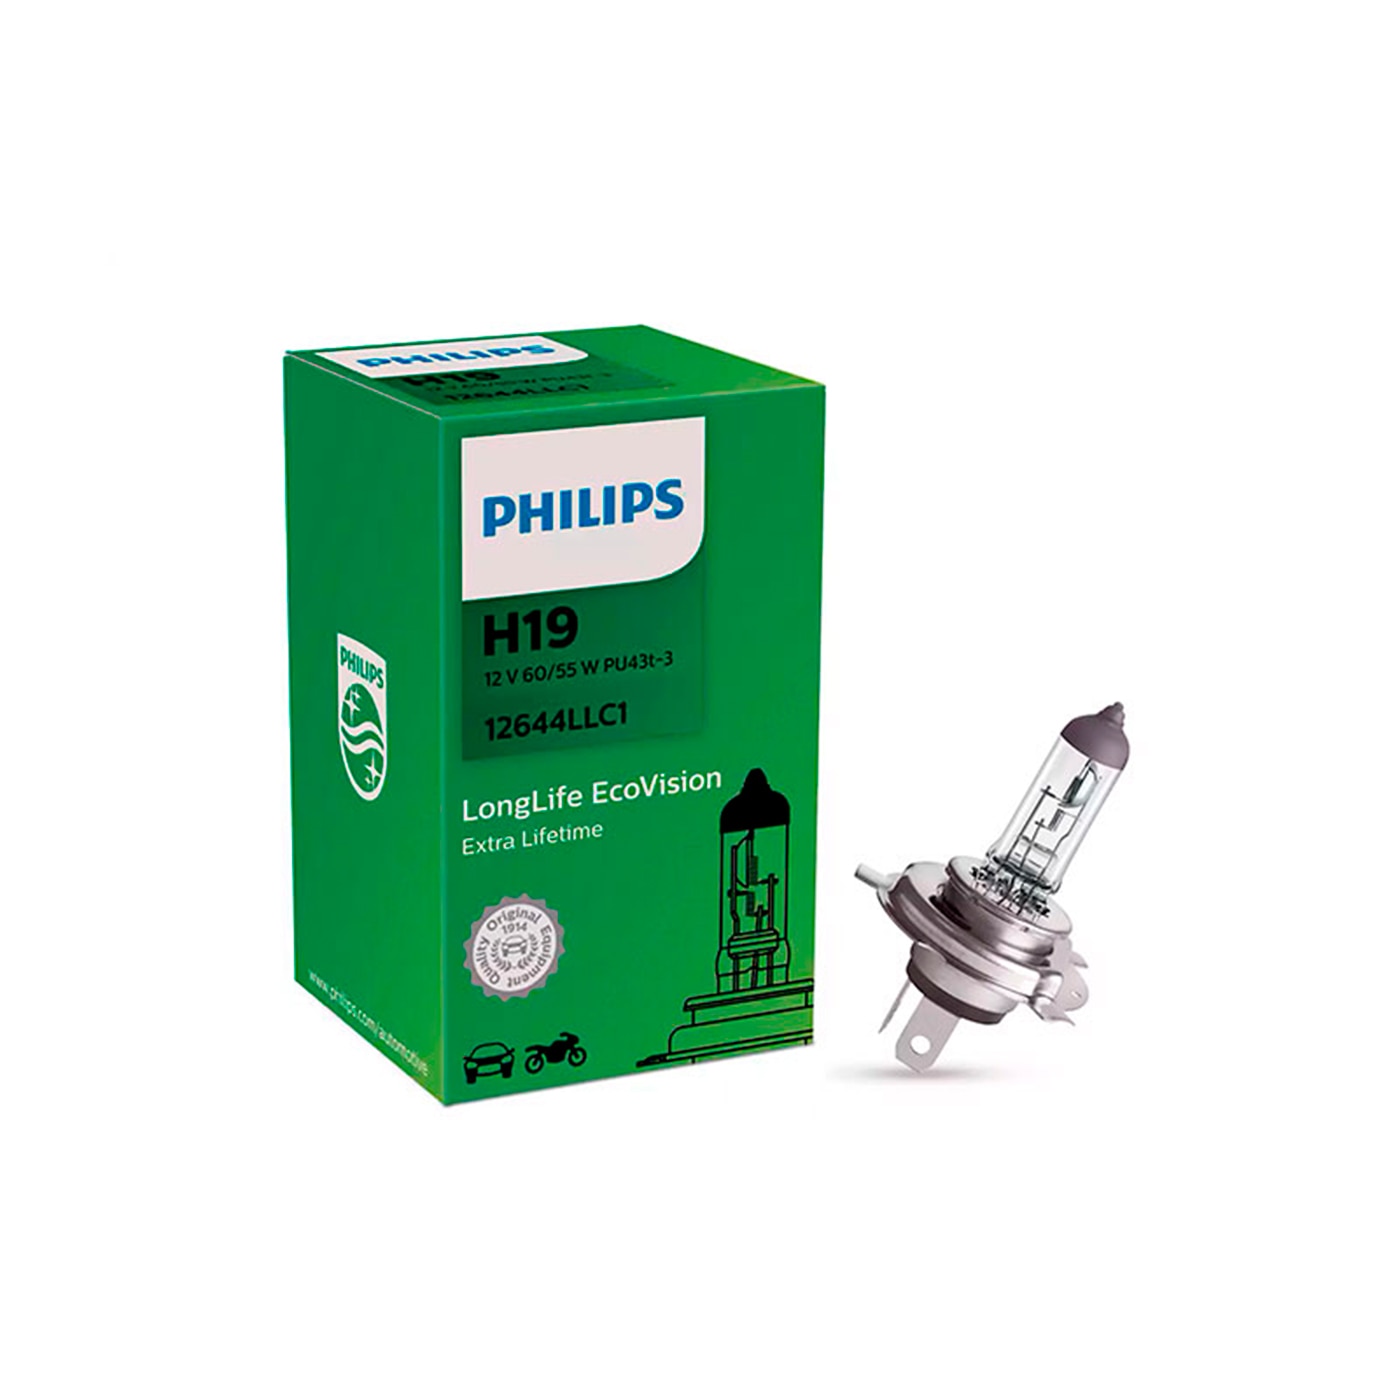 Philips longlife ecovision h19